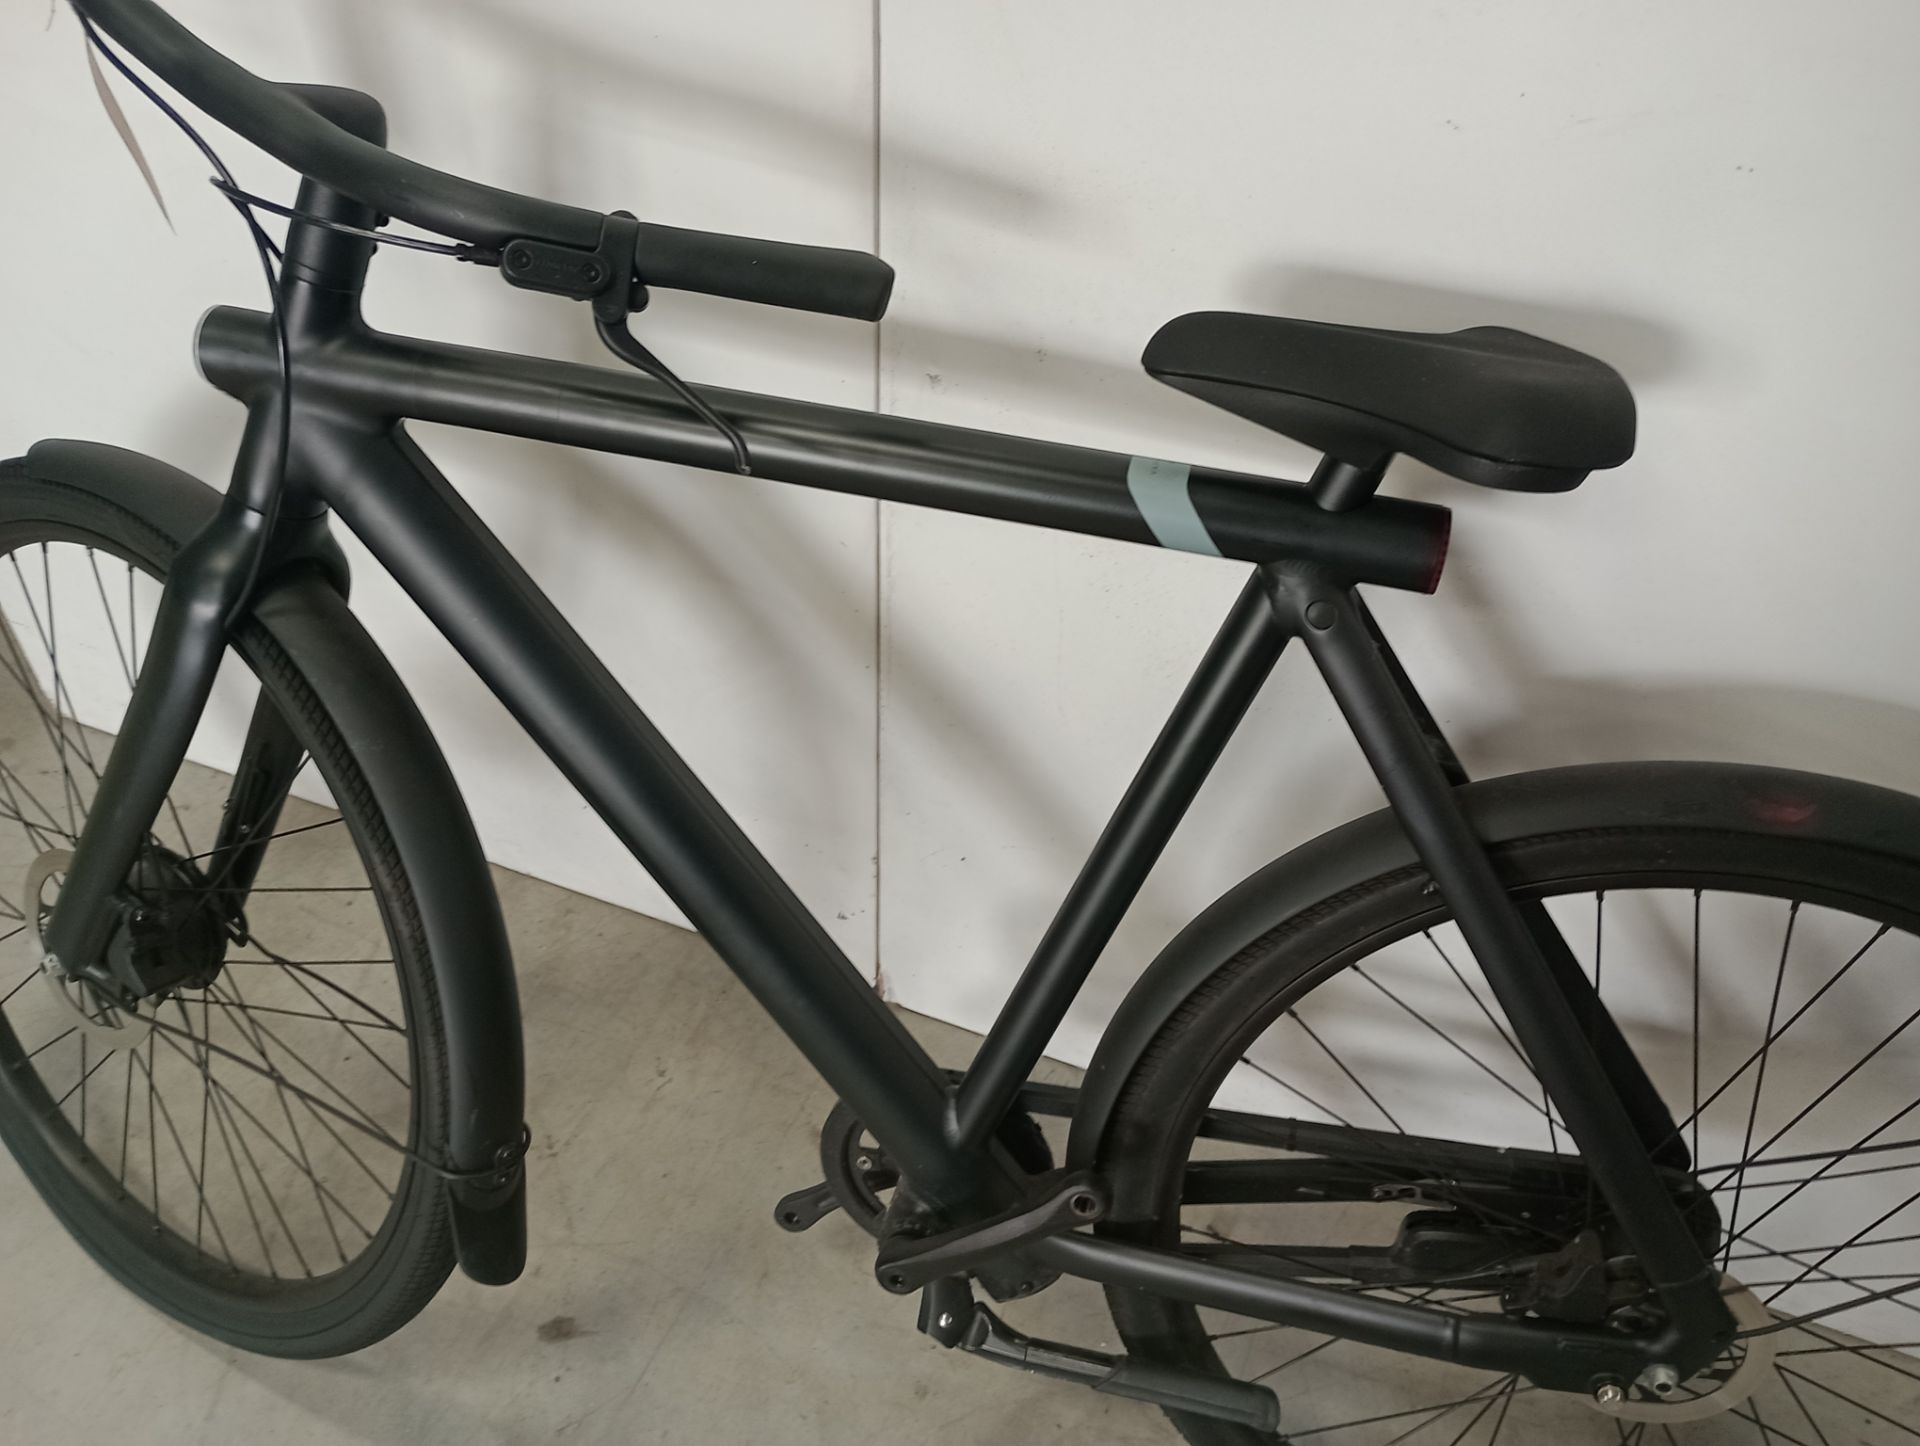 VanMoof S3 Electric Bike, Frame Number ASY3118705 (NOT ROADWORTHY - FOR SPARES ONLY) (No codes - Image 2 of 3